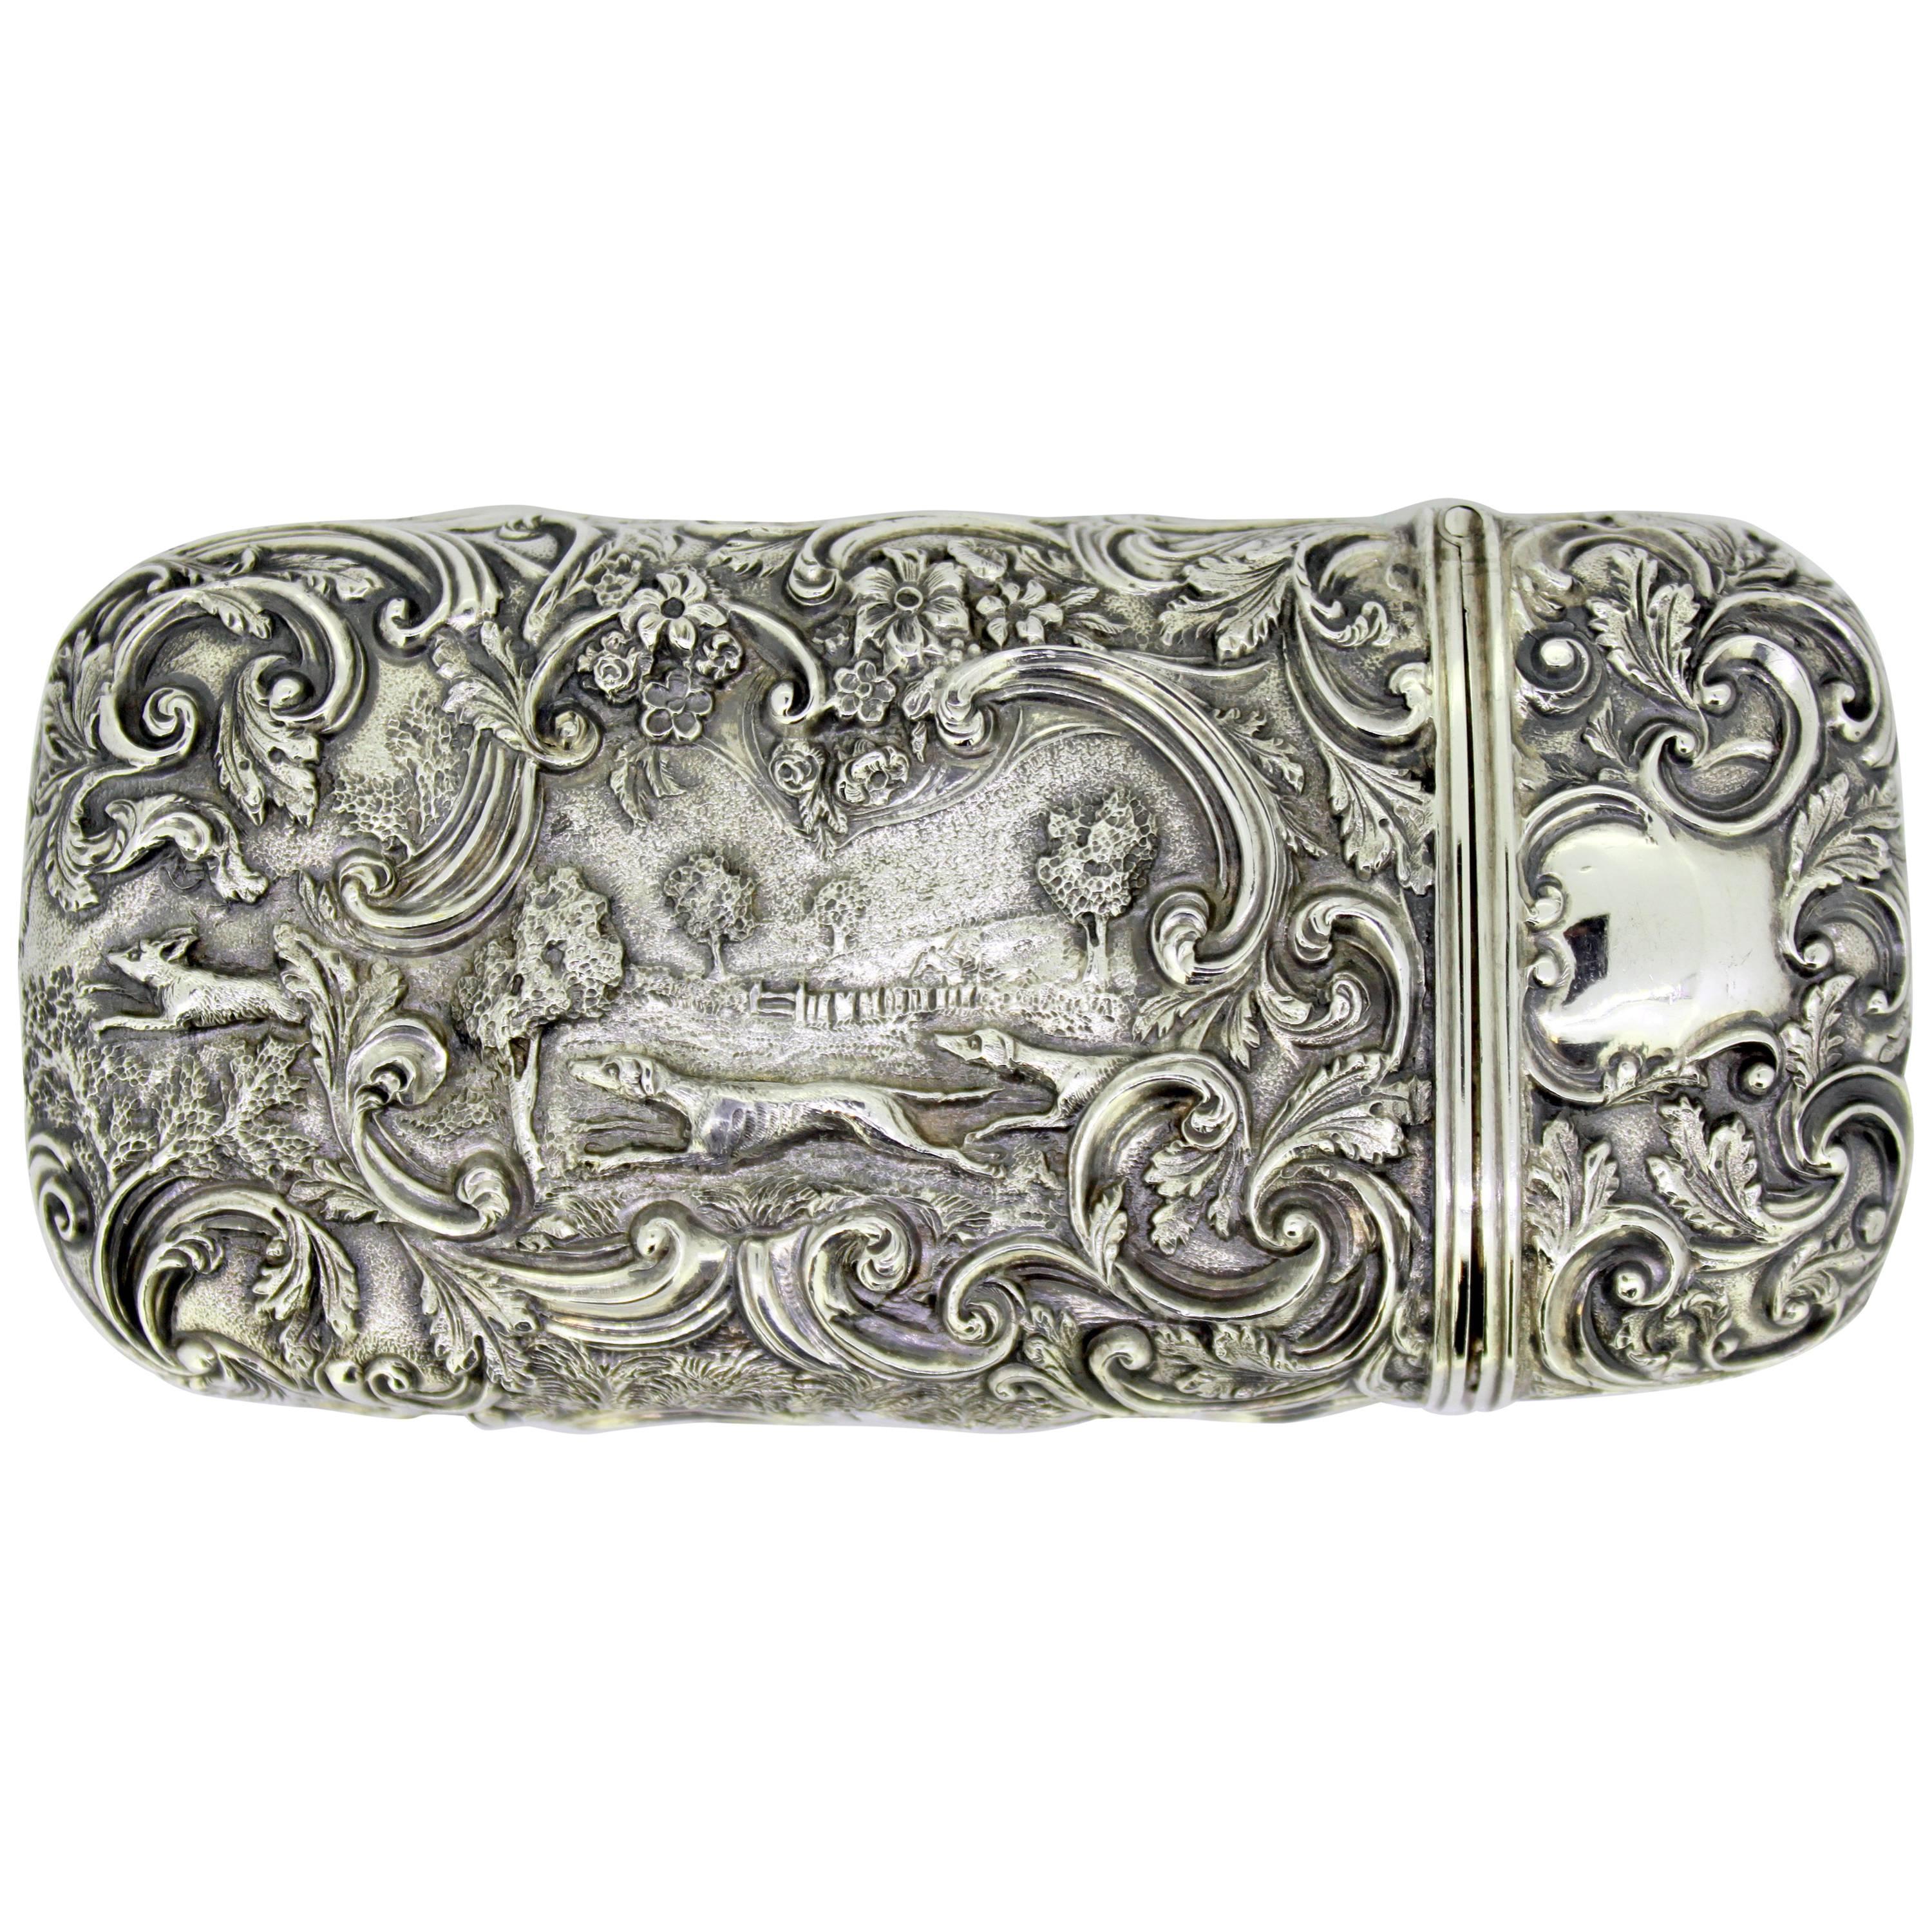 Elaborately Engraved Victorian Silver Case with Hunting Scene, Roberts & Belk